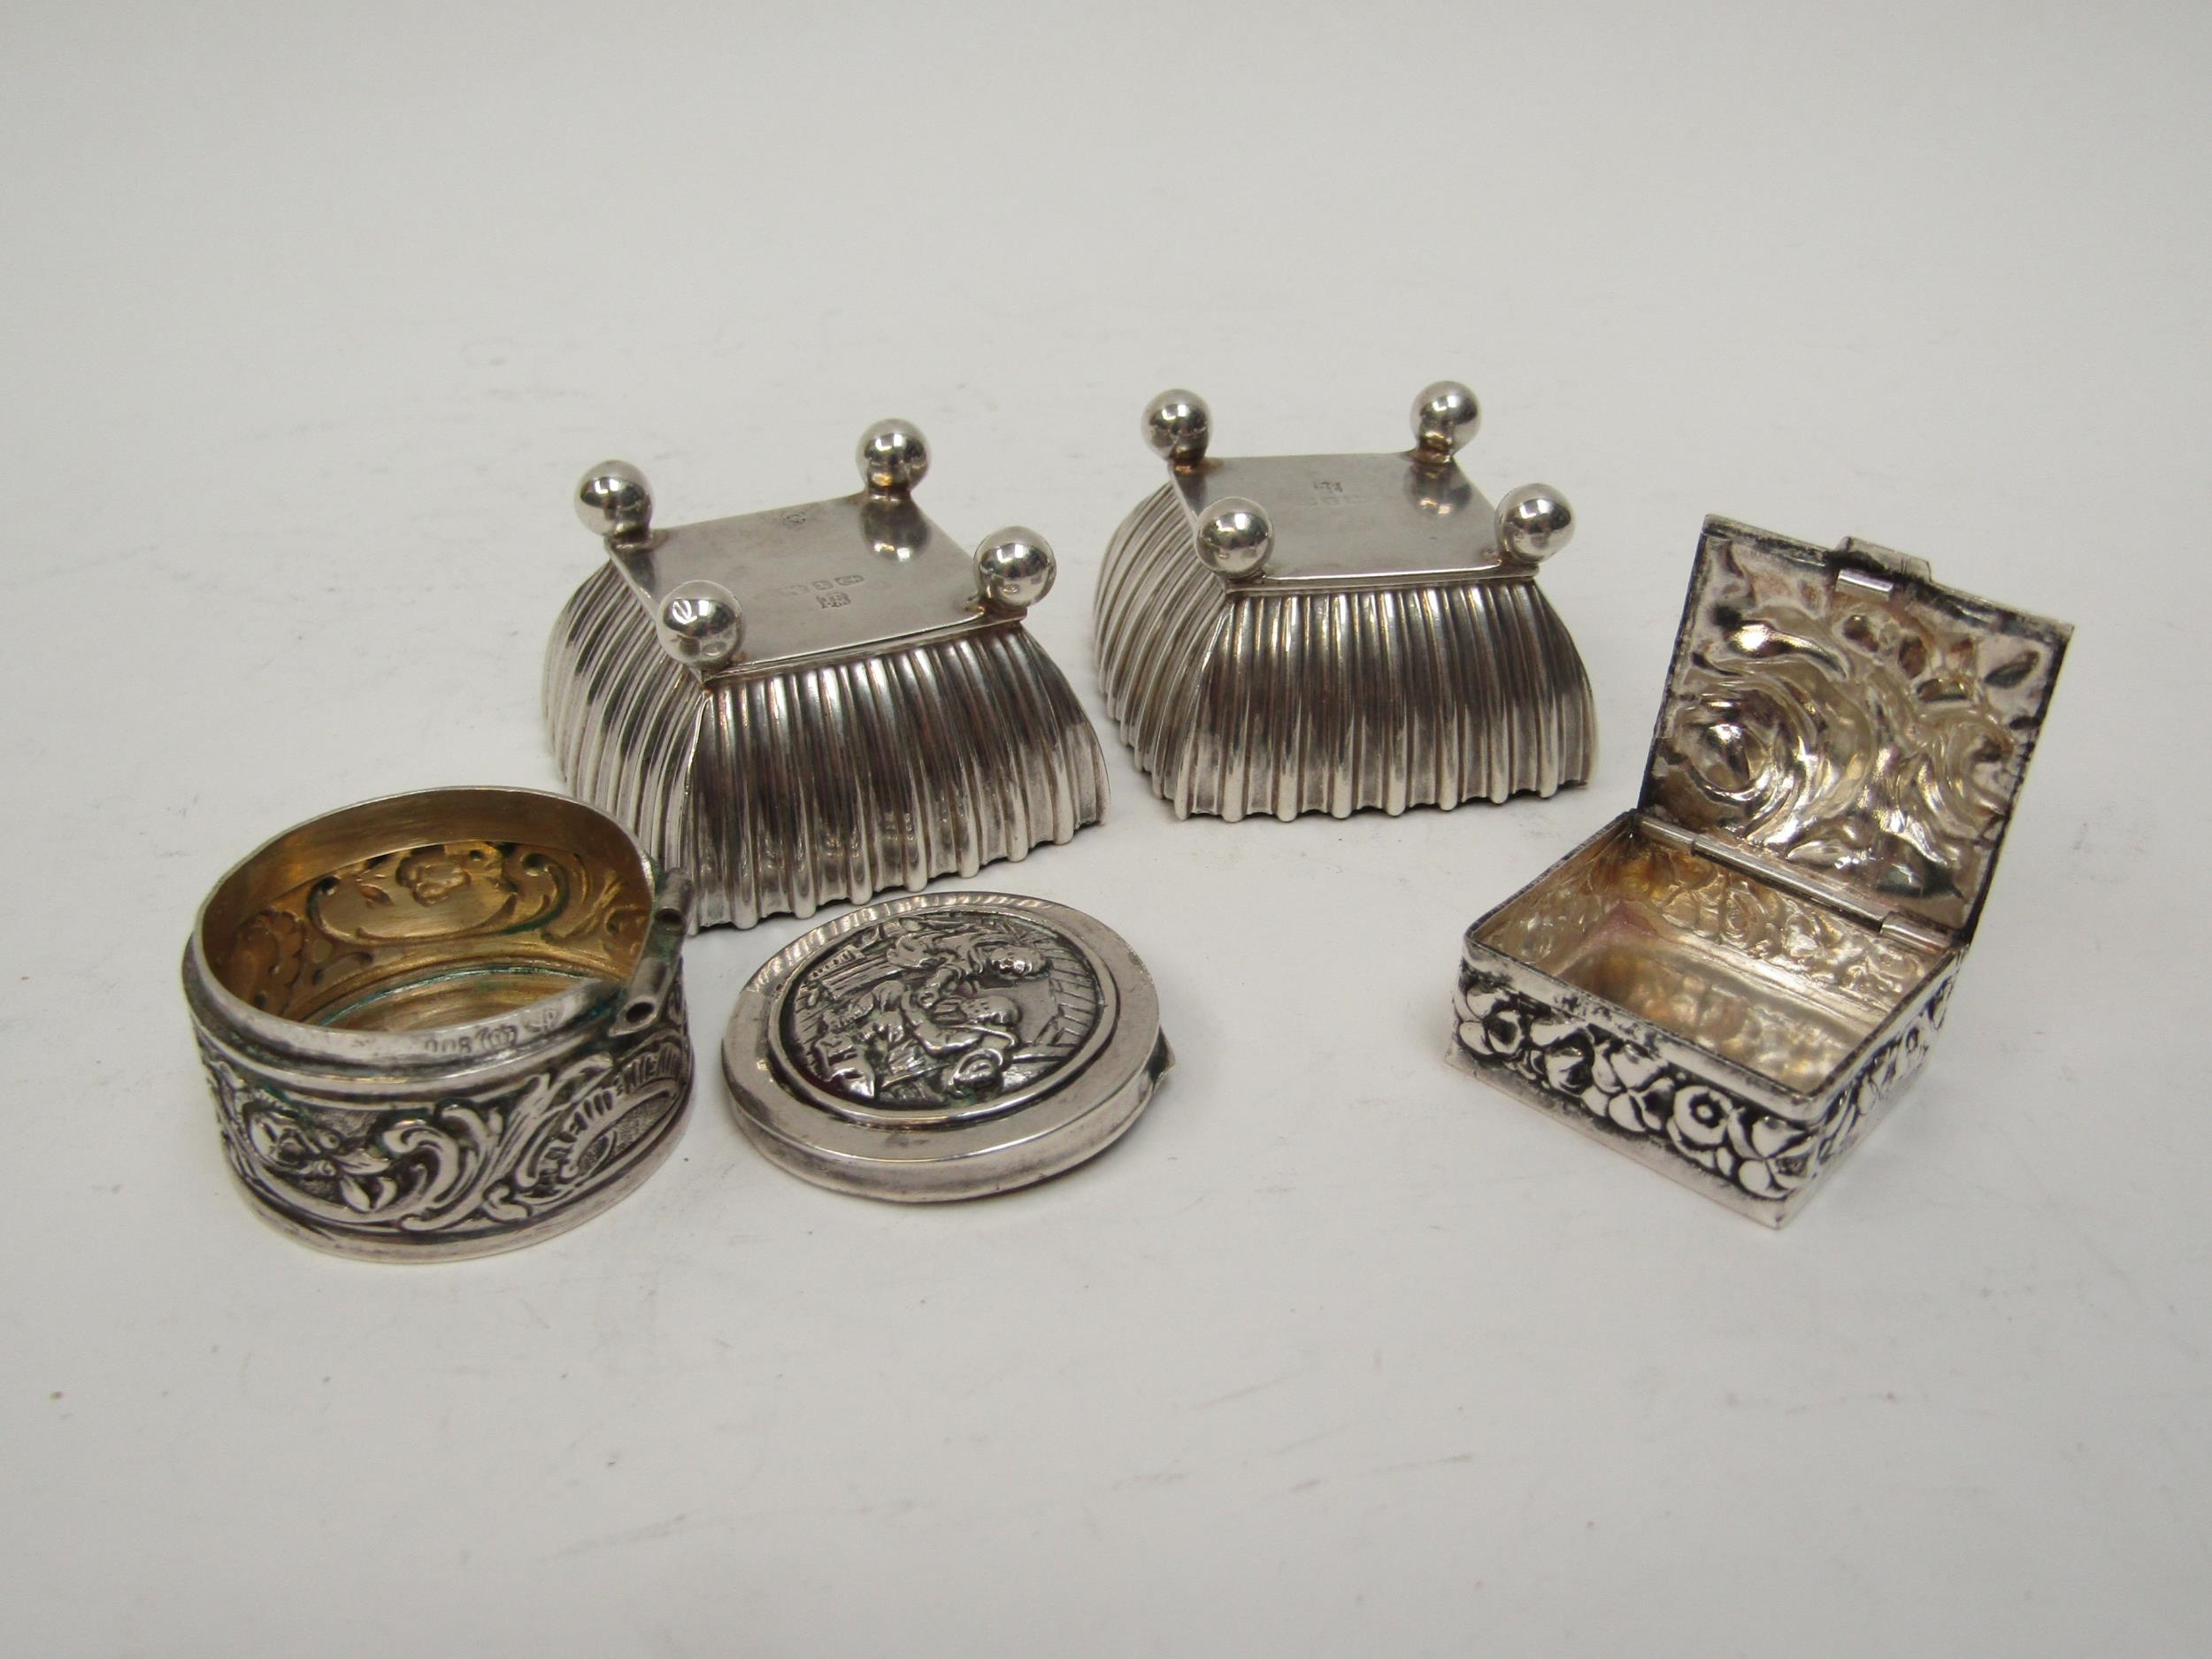 A pair of Goldsmiths & Silversmiths Co. (William Gibson & John Lawrence Langman) silver salts with - Image 3 of 3